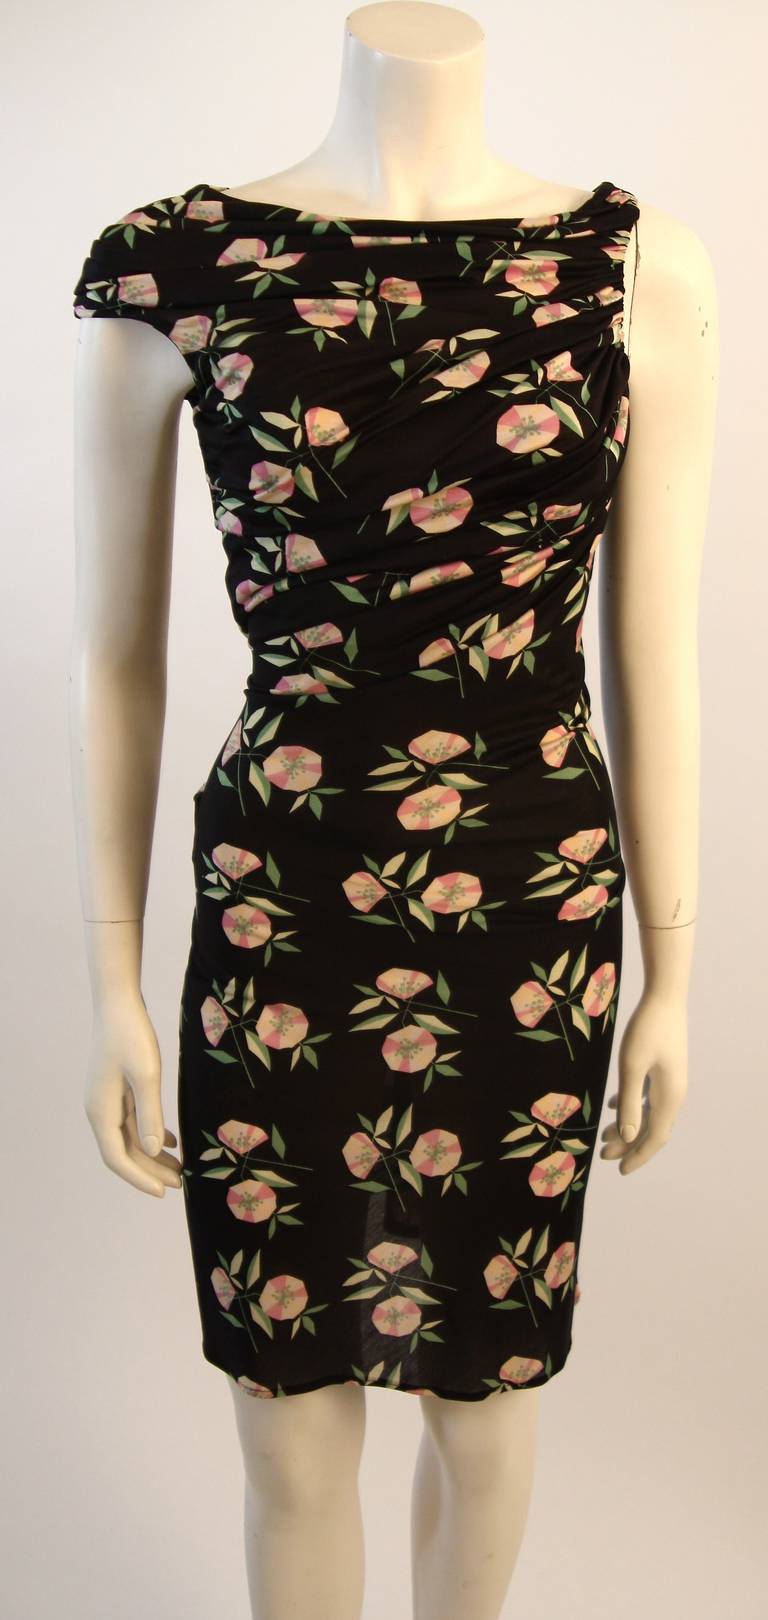 This is a great vintage piece by Gianni Versace Couture. It is composed of a semi-sheer lined silk jersey blend floral print fabric. The dress is beautifully draped and ruched. There is an inside body suit with crotch fastening. Made in Italy.